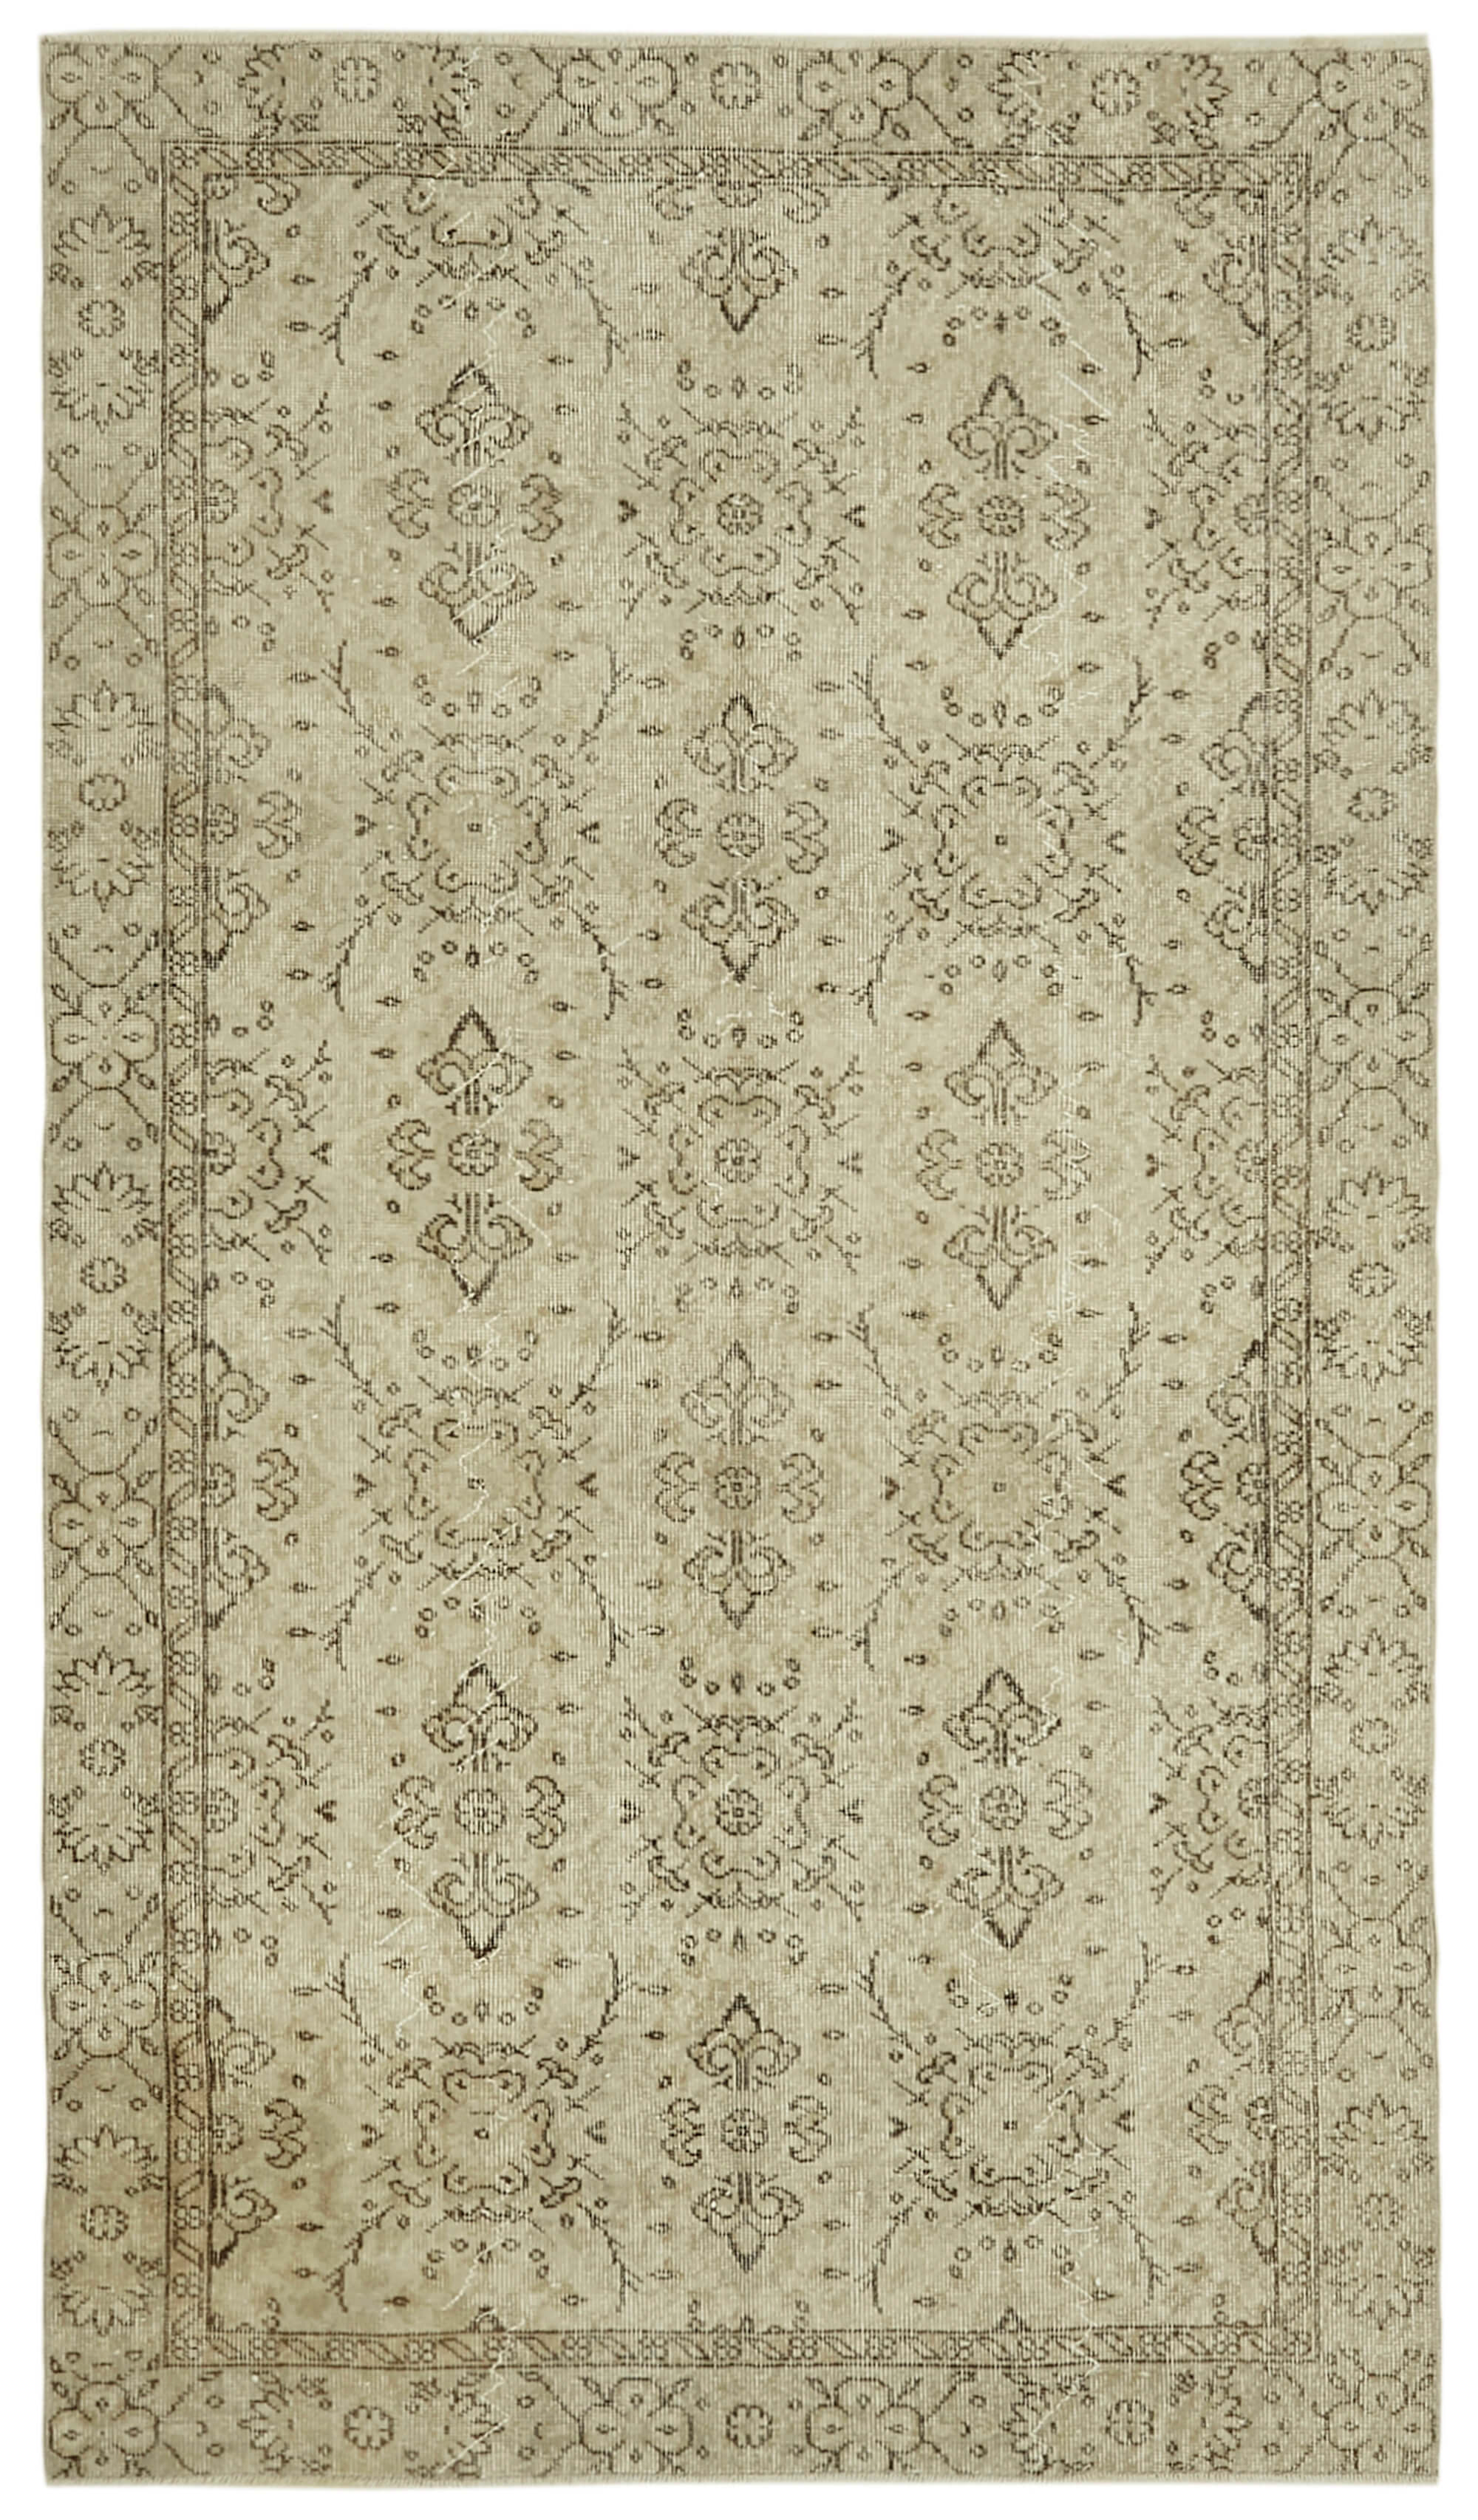 Handmade White Wash Area Rug > Design# OL-AC-41485 > Size: 4'-10" x 8'-5", Carpet Culture Rugs, Handmade Rugs, NYC Rugs, New Rugs, Shop Rugs, Rug Store, Outlet Rugs, SoHo Rugs, Rugs in USA